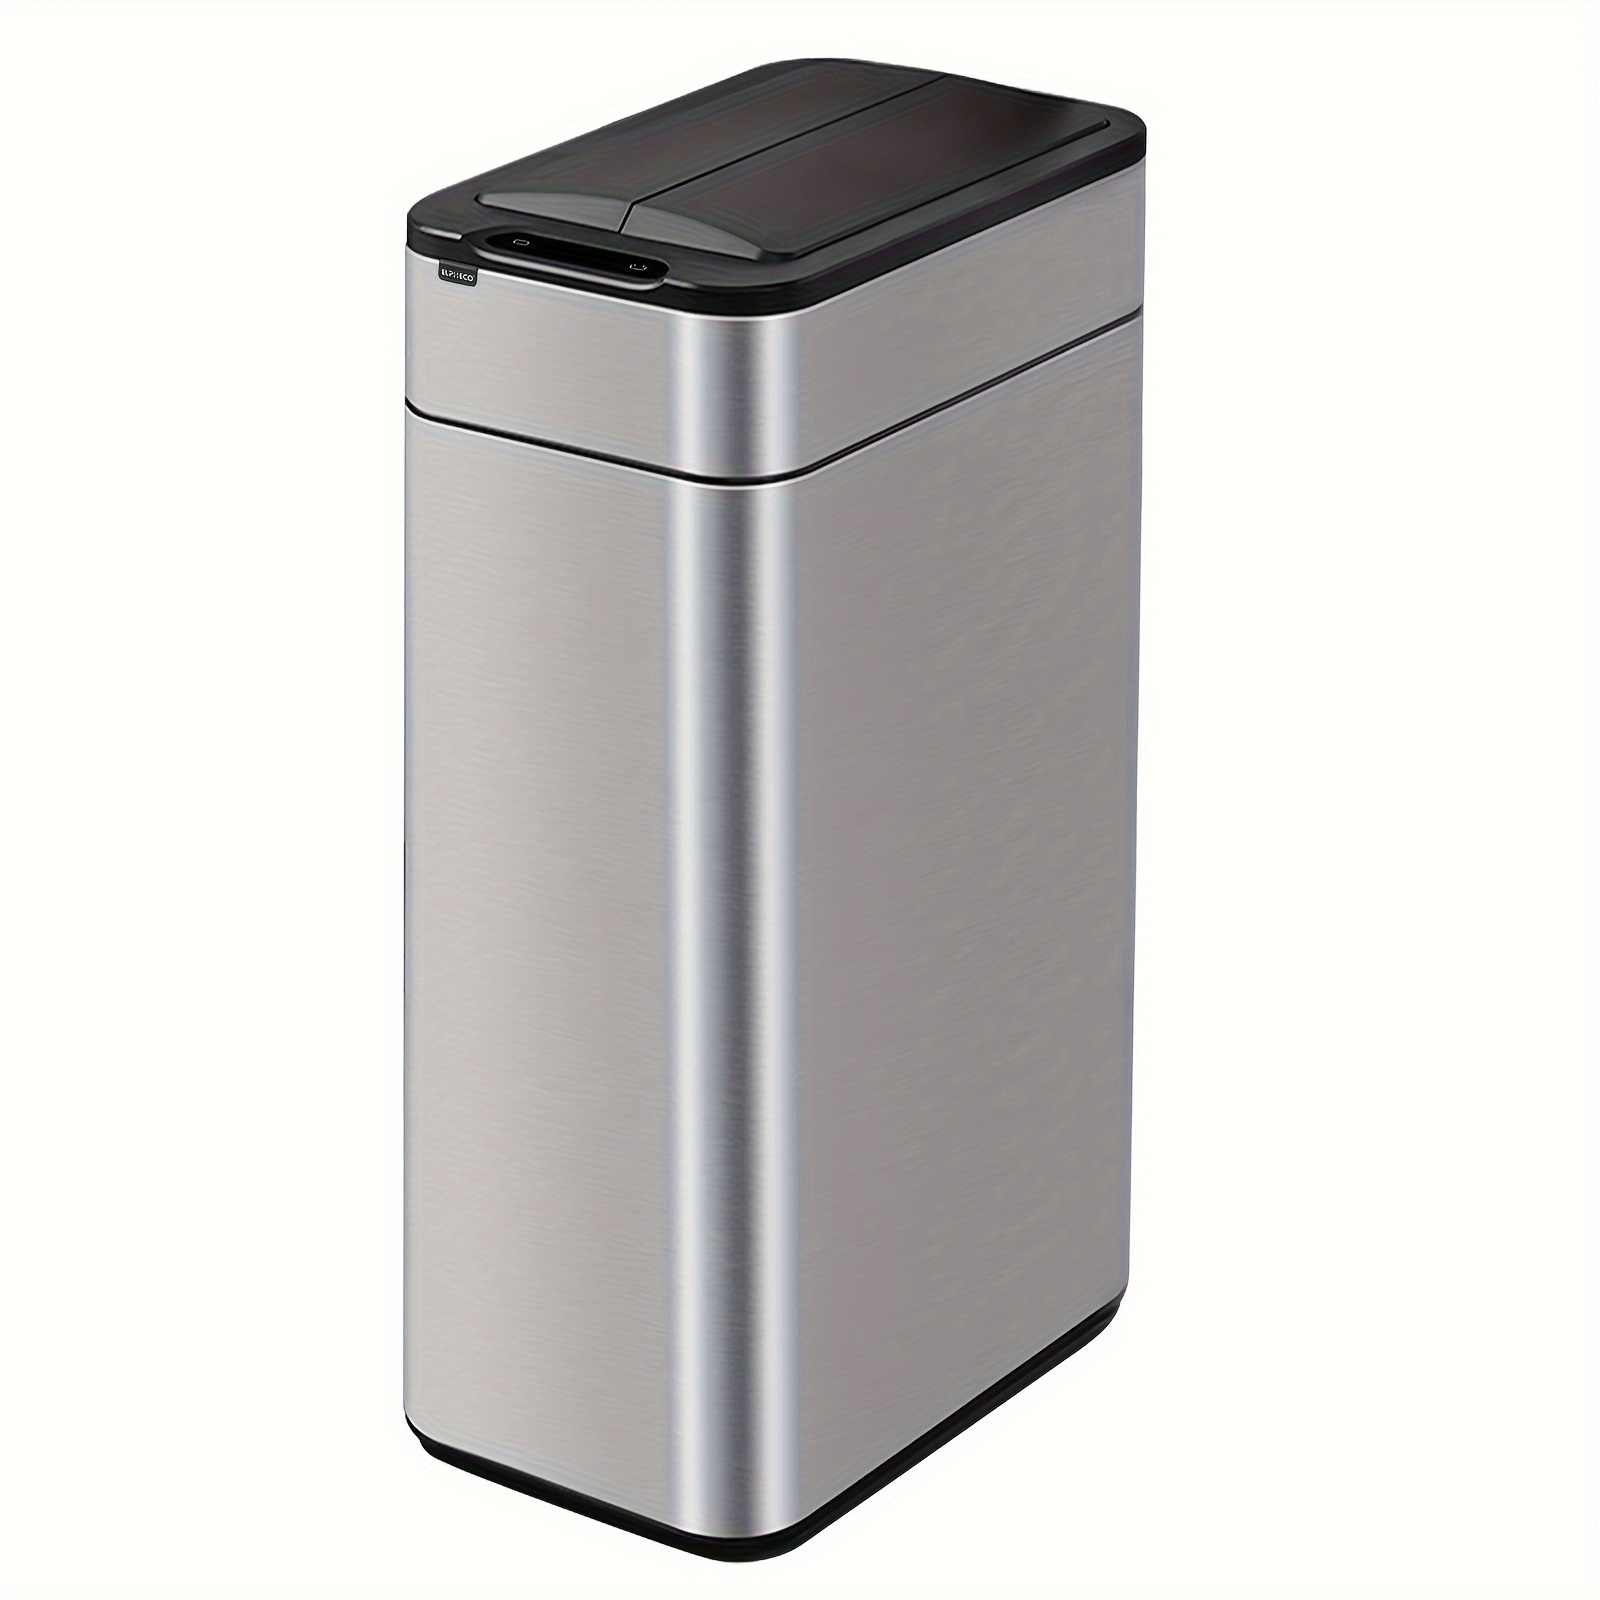 

Elpheco Kitchen Trash Can 40 Liter/ 10.6 Gallon Automatic Trash Can With Butterfly Lid, Brushed Stainless Steel Finish, Motion Sensor Garbage Can For Kitchen, Office, Living Room, 2 Aa Batteries